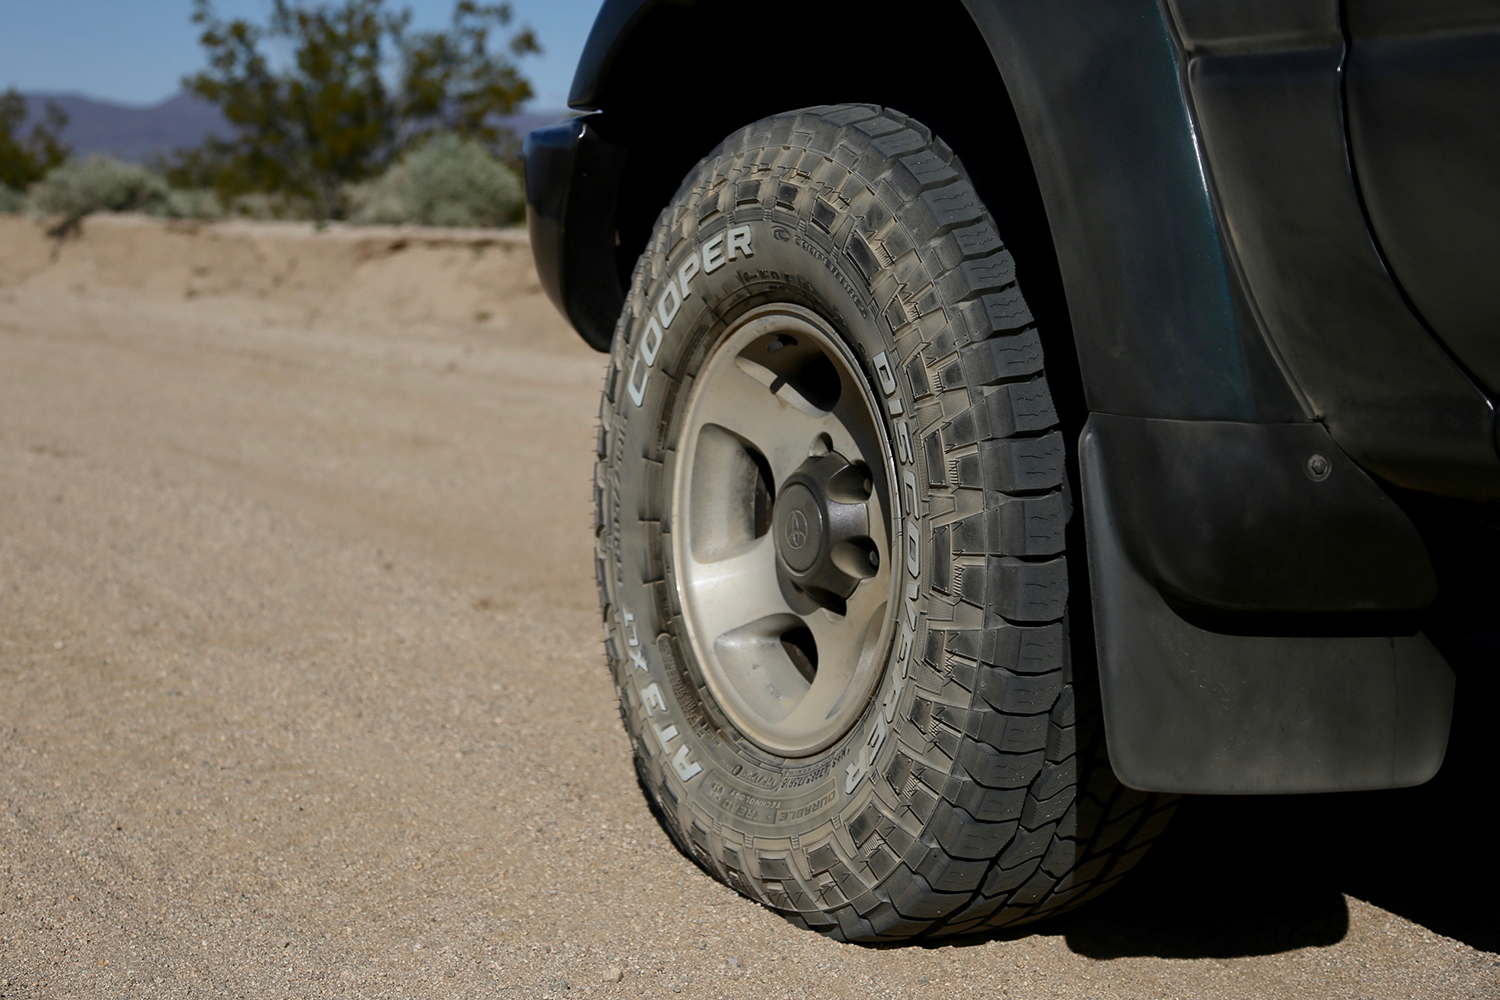 Cooper Discoverer AT3 XLT Tire Review